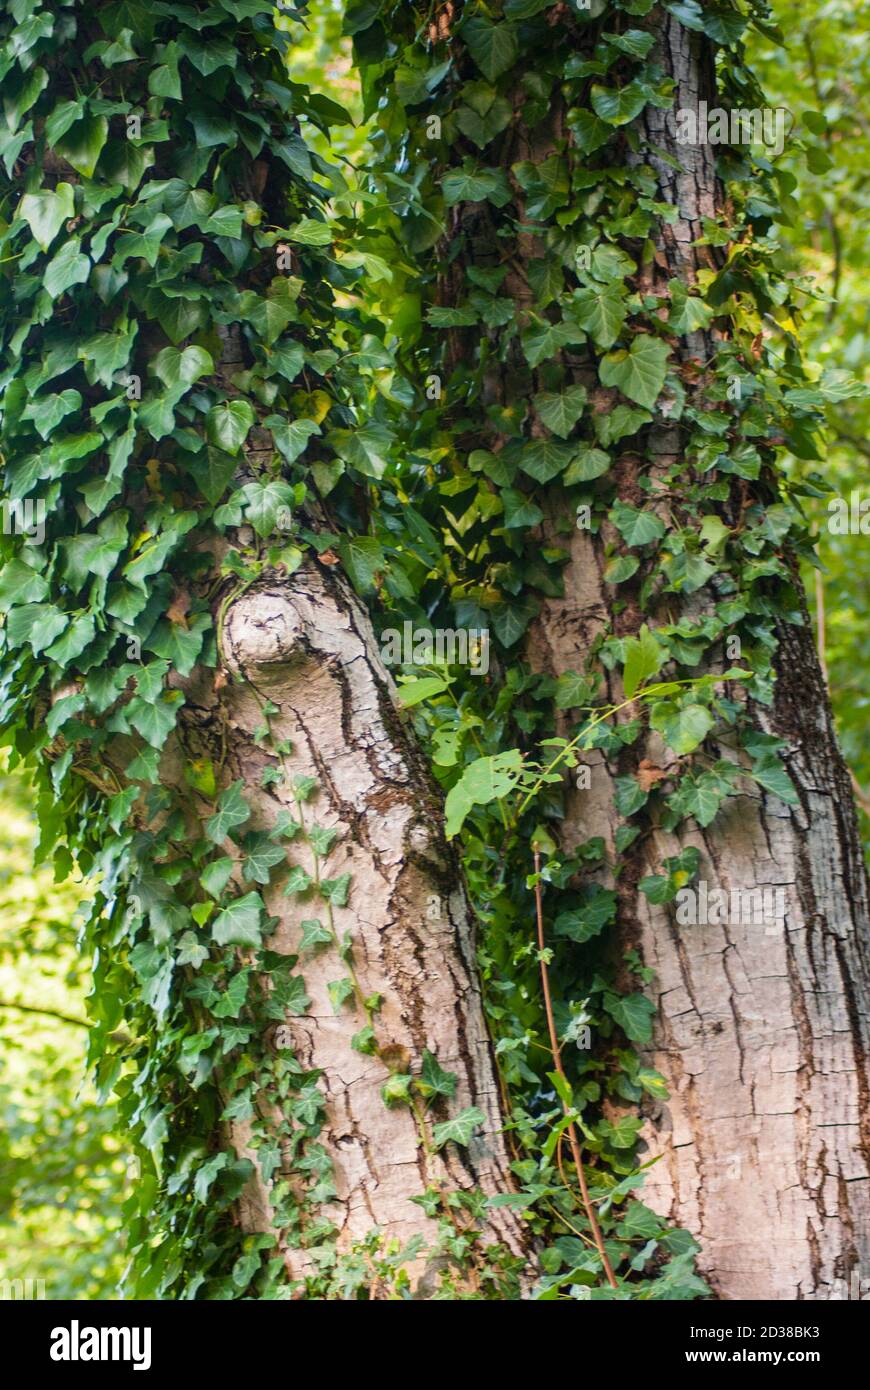 Green ivy bunch hanging around wood tree in the forest Stock Photo